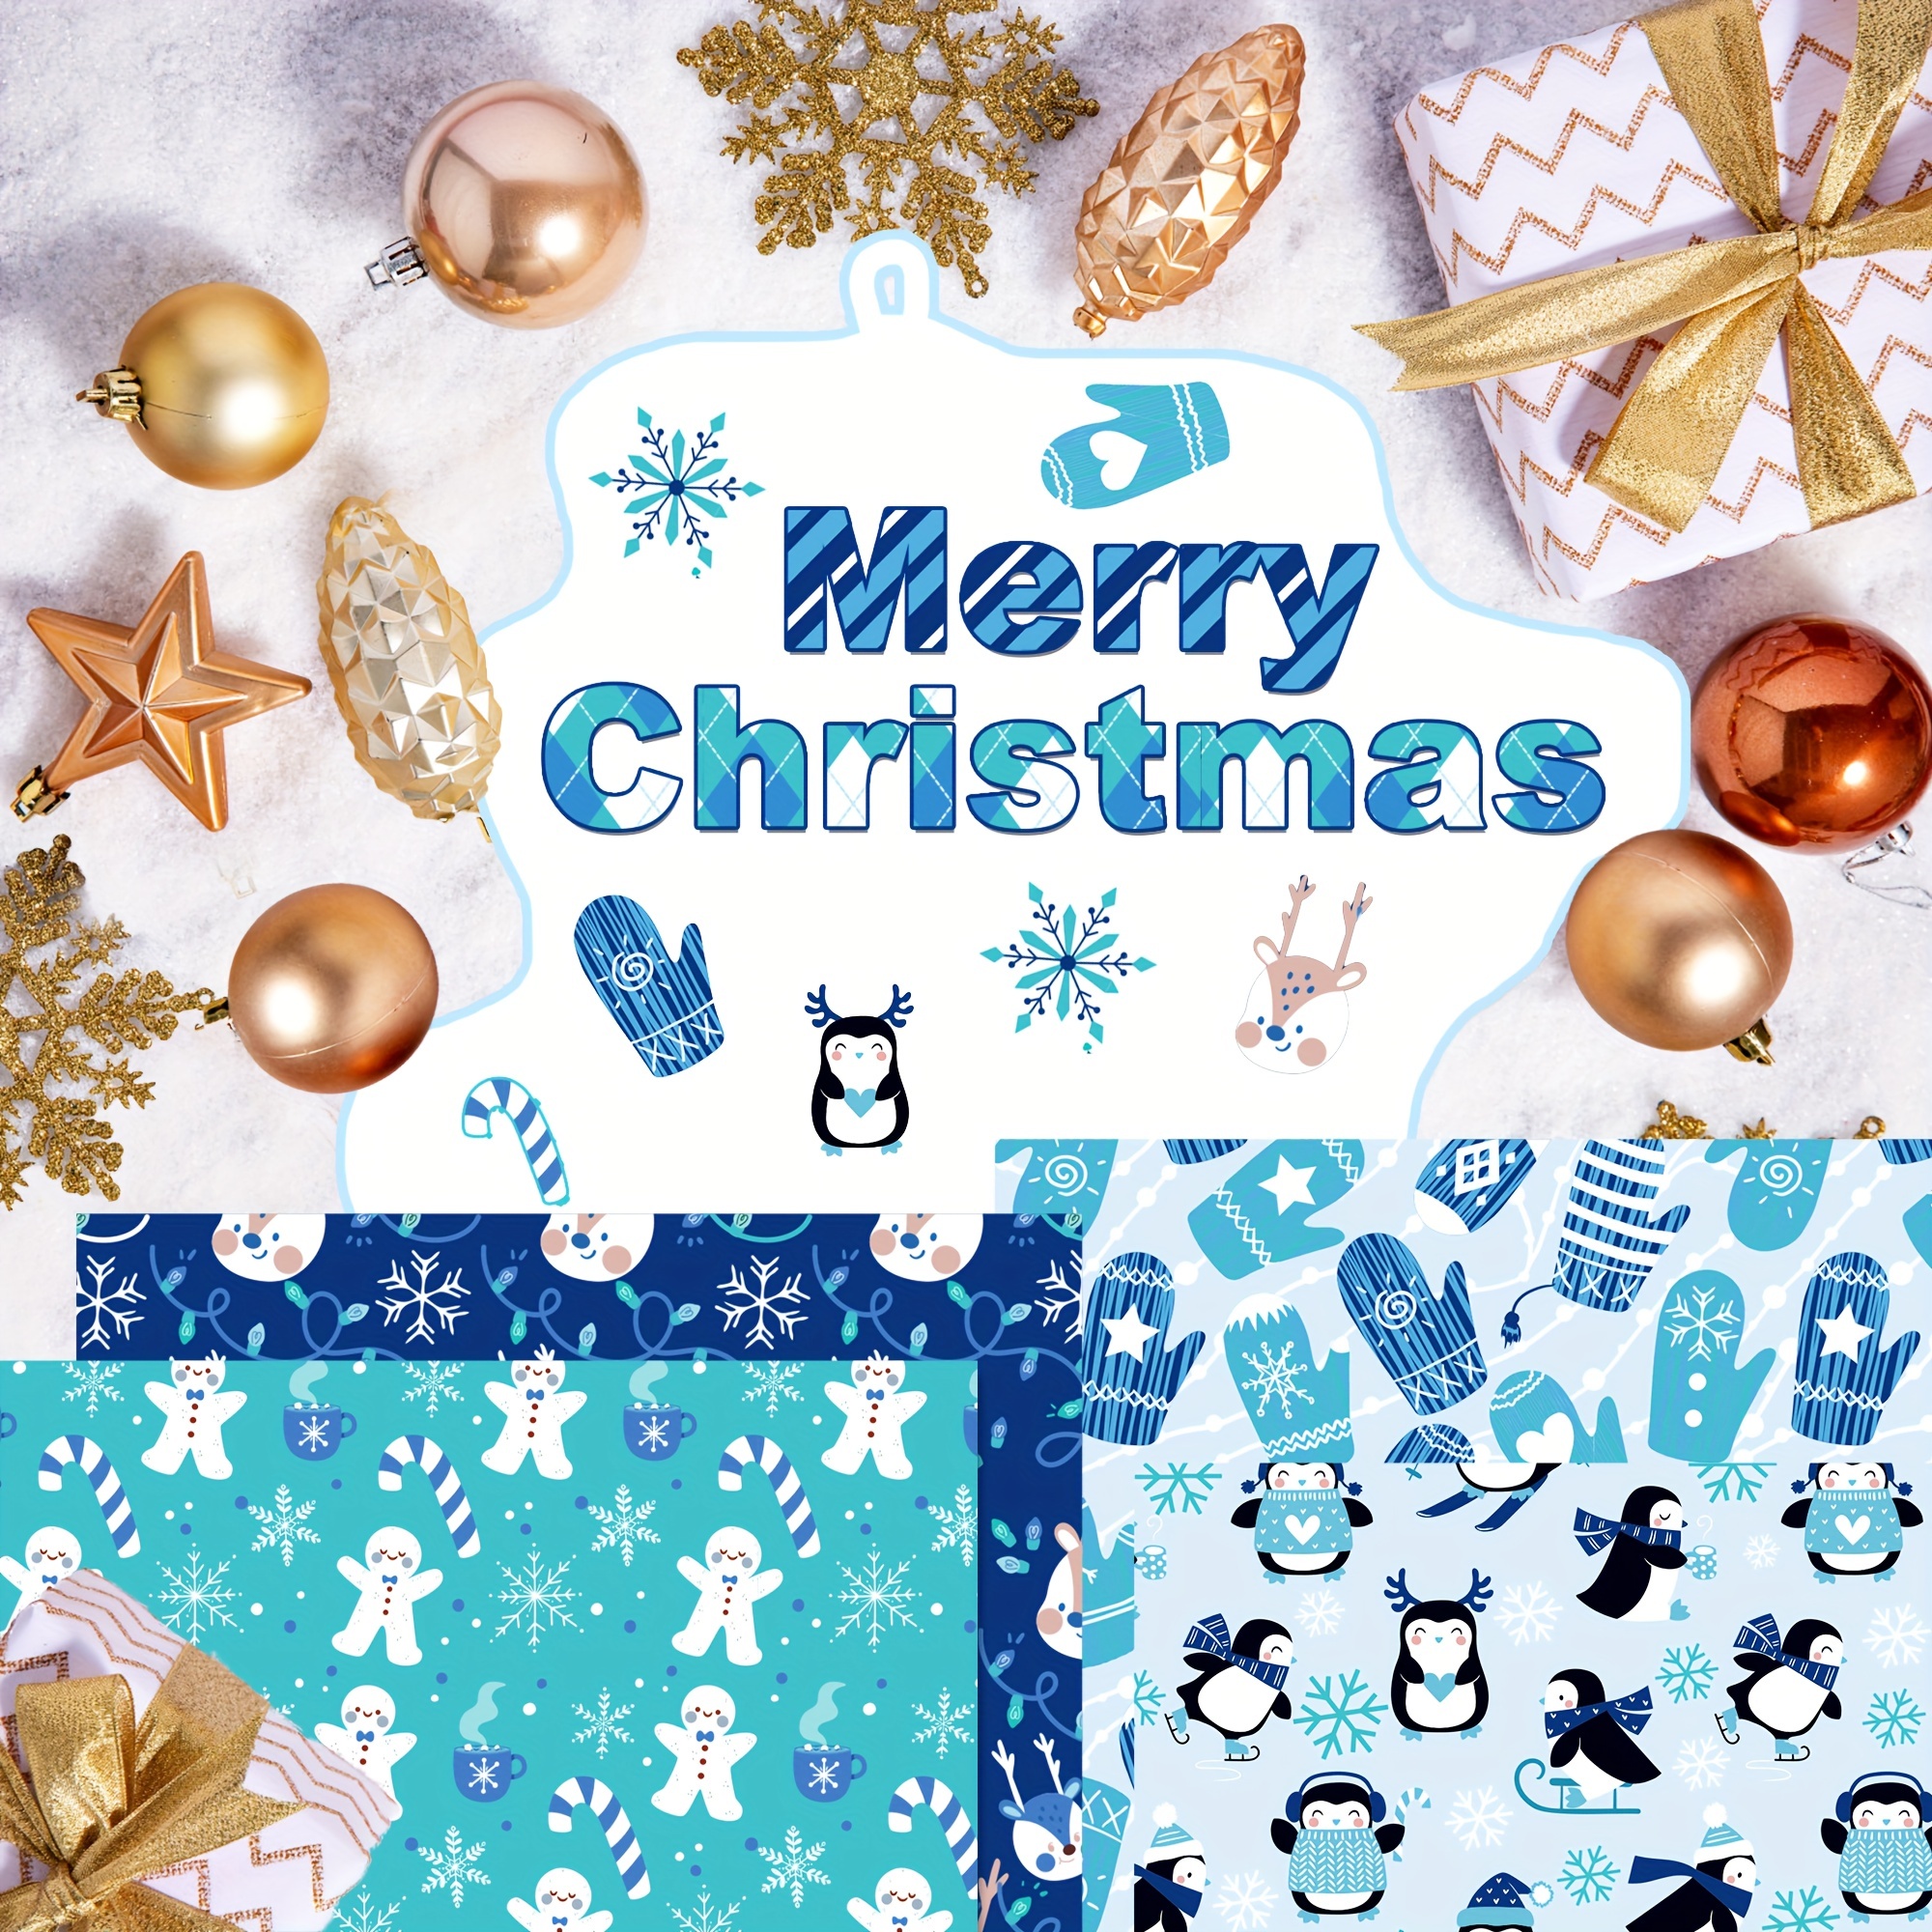 Winter Snowflakes Scrapbook Paper: Decorative Craft Papers For Card Making  and Crafts Projects - Scrapbooking Kit - Double Sided Sheets - Blue Color